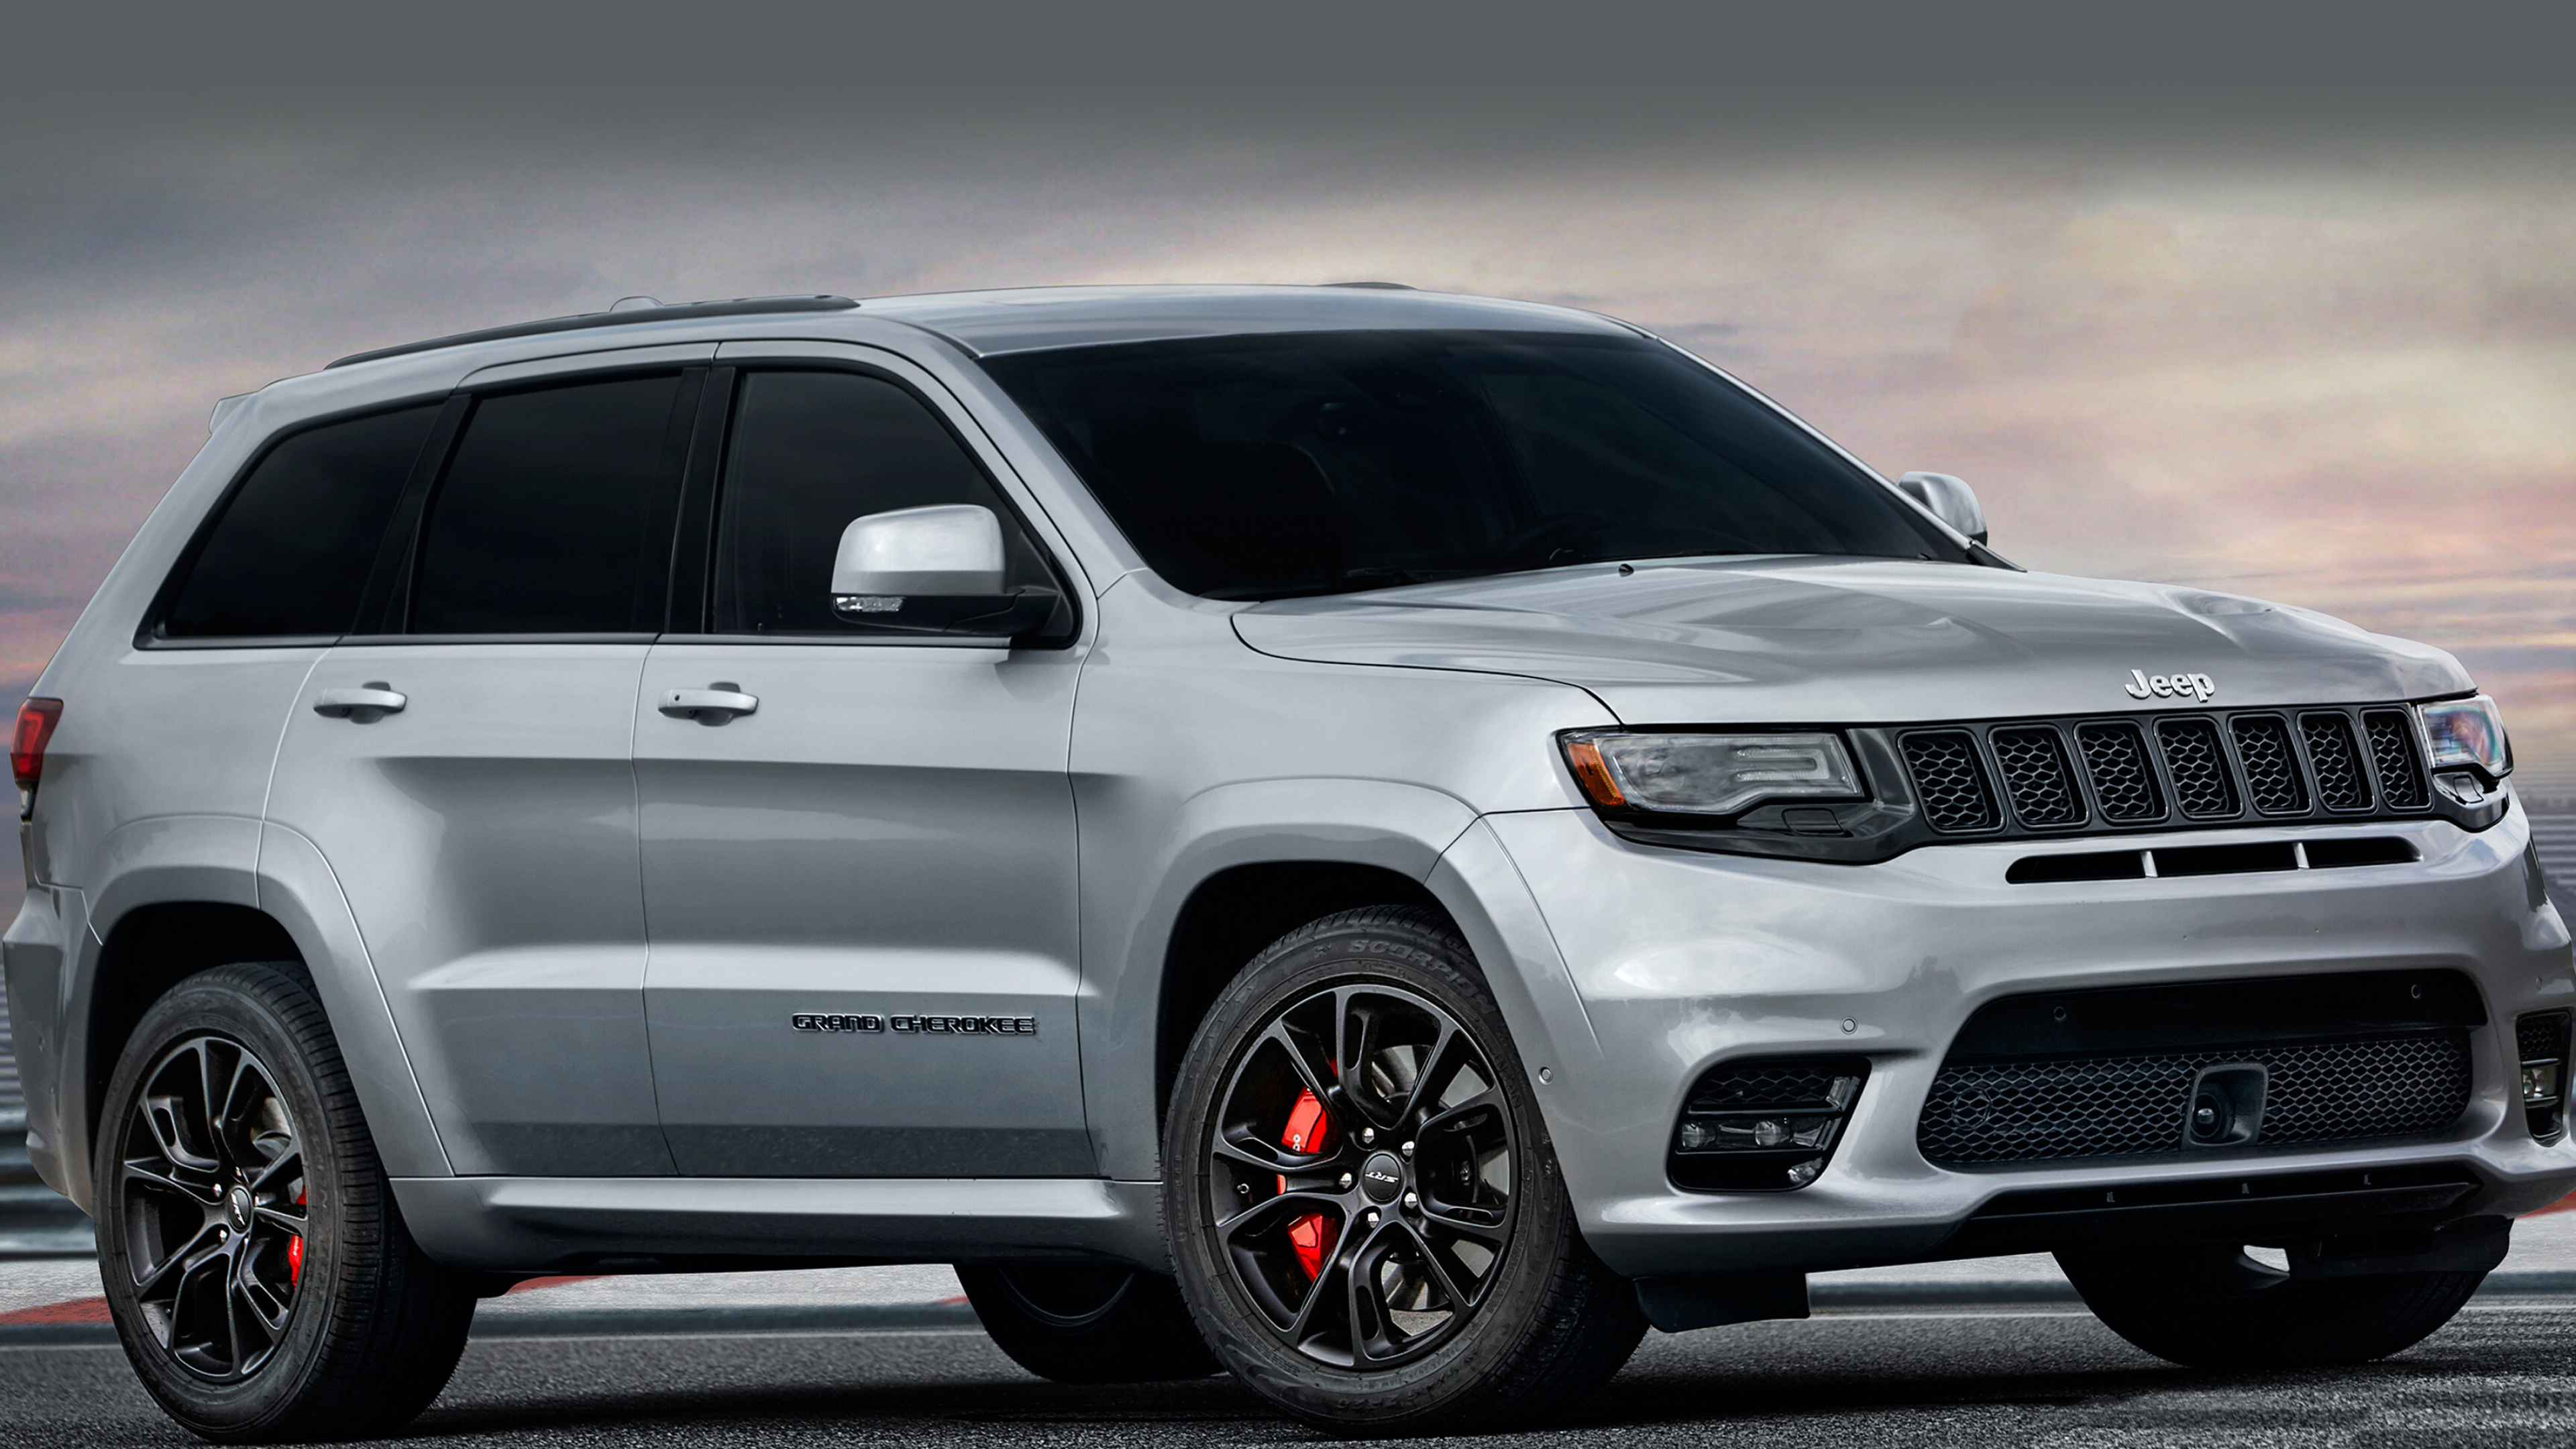 Jeep Grand Cherokee: An American automobile marque, A 5 seater SUV. 3840x2160 4K Background.